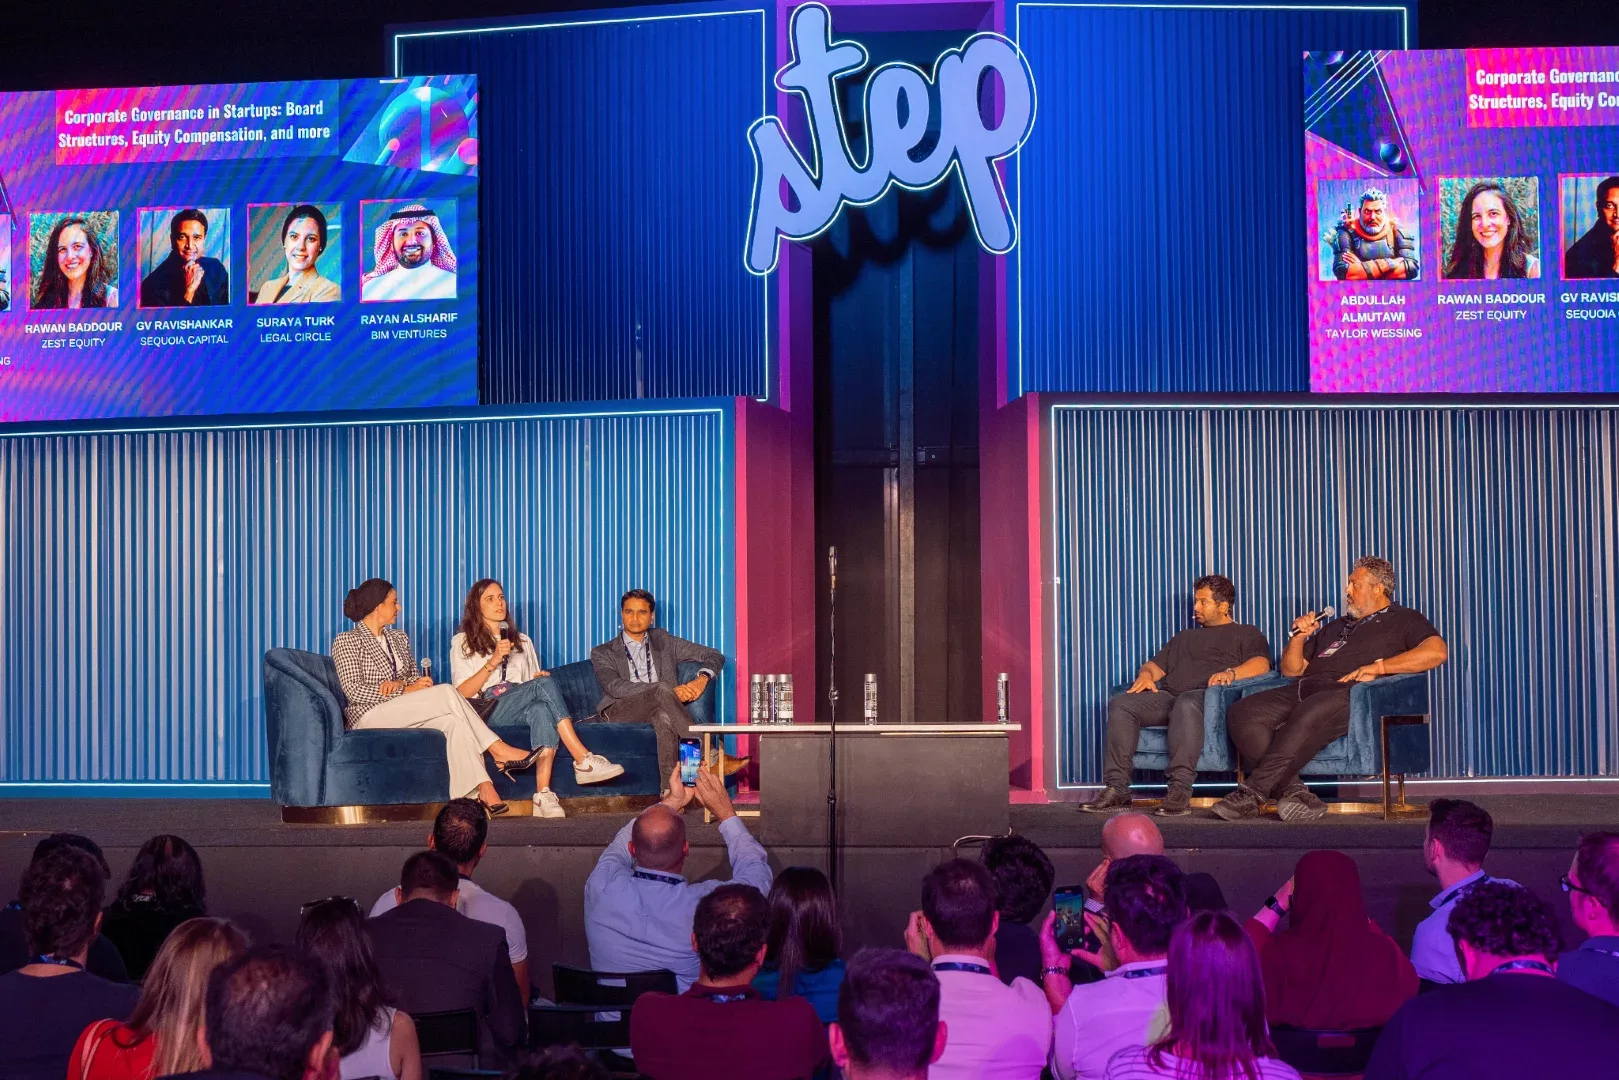 Step Conference to Bring 8000+ Attendees, 400+ Startups, and 150 VCs to its 12th Edition